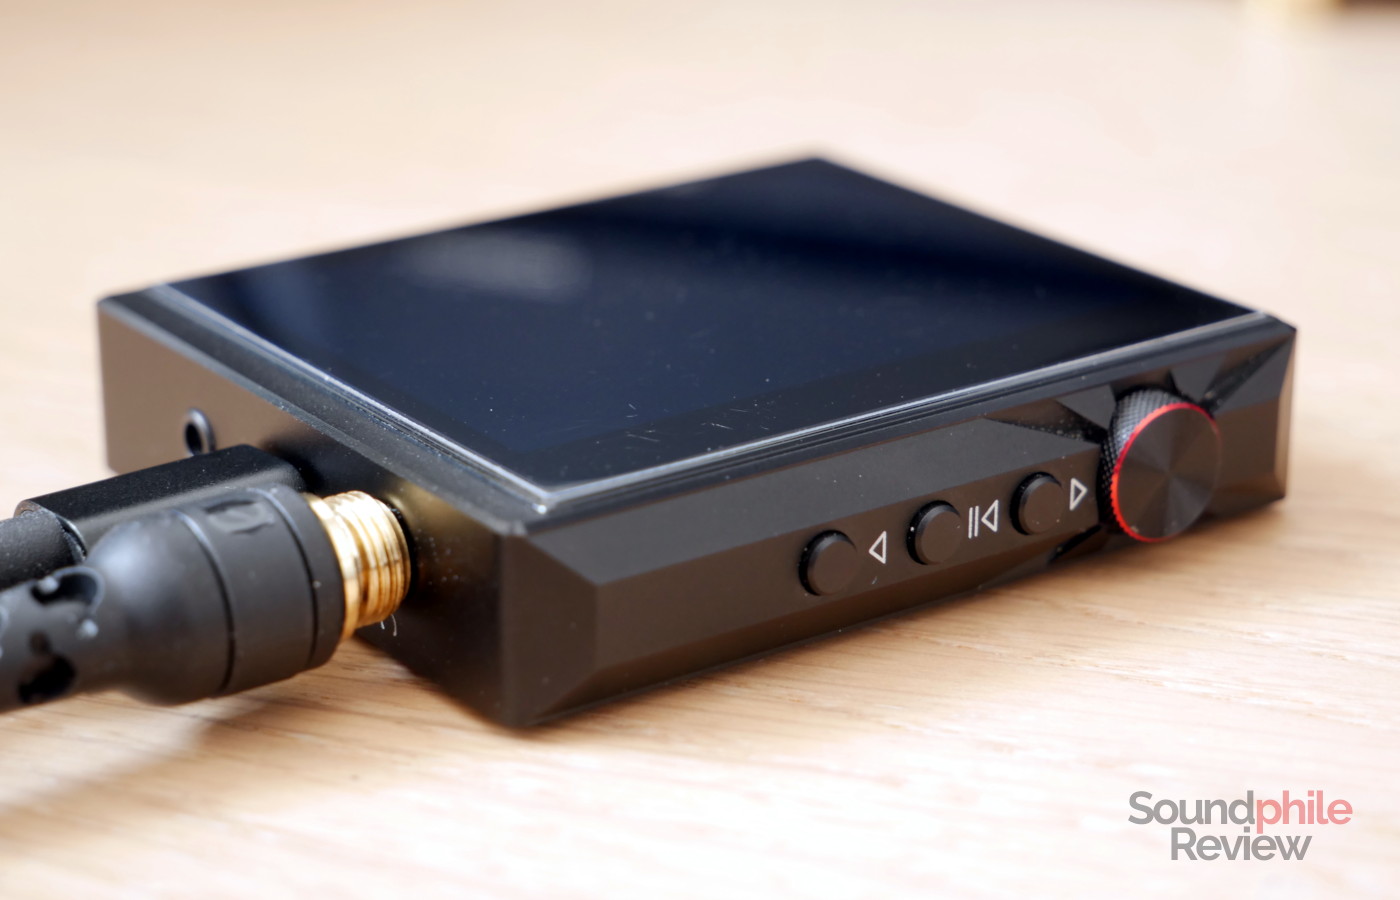 The Hidizs AP80 PRO-X is a very small DAP